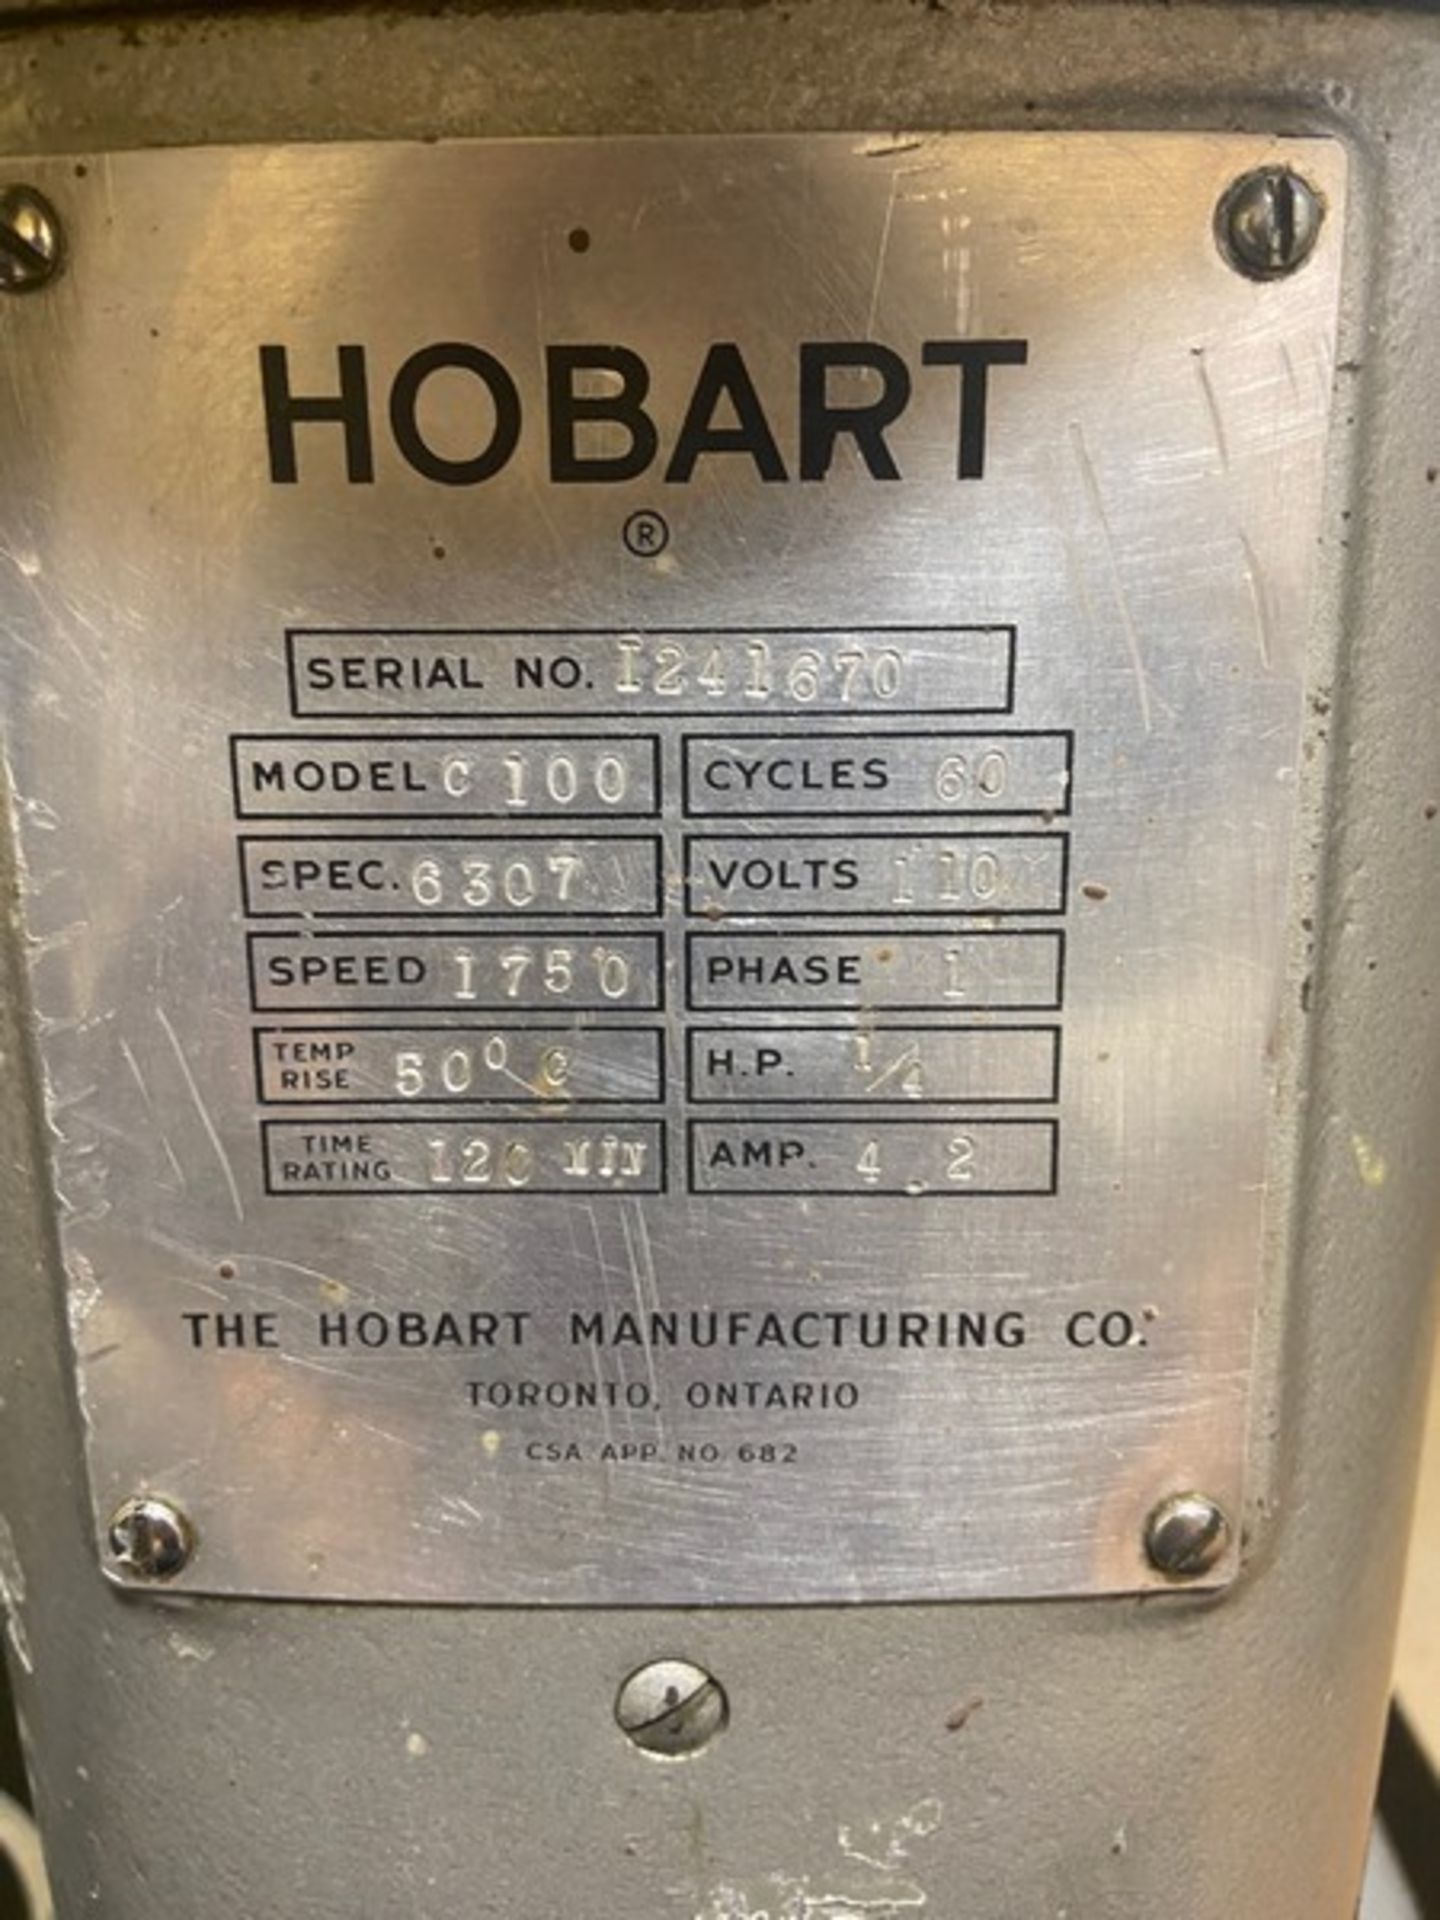 HOBART Table Top Mixer, mod. C100, ser. 1241670, 1750 Speed, 110 Volts, 1 Phase, with S/S Mixing - Image 2 of 7